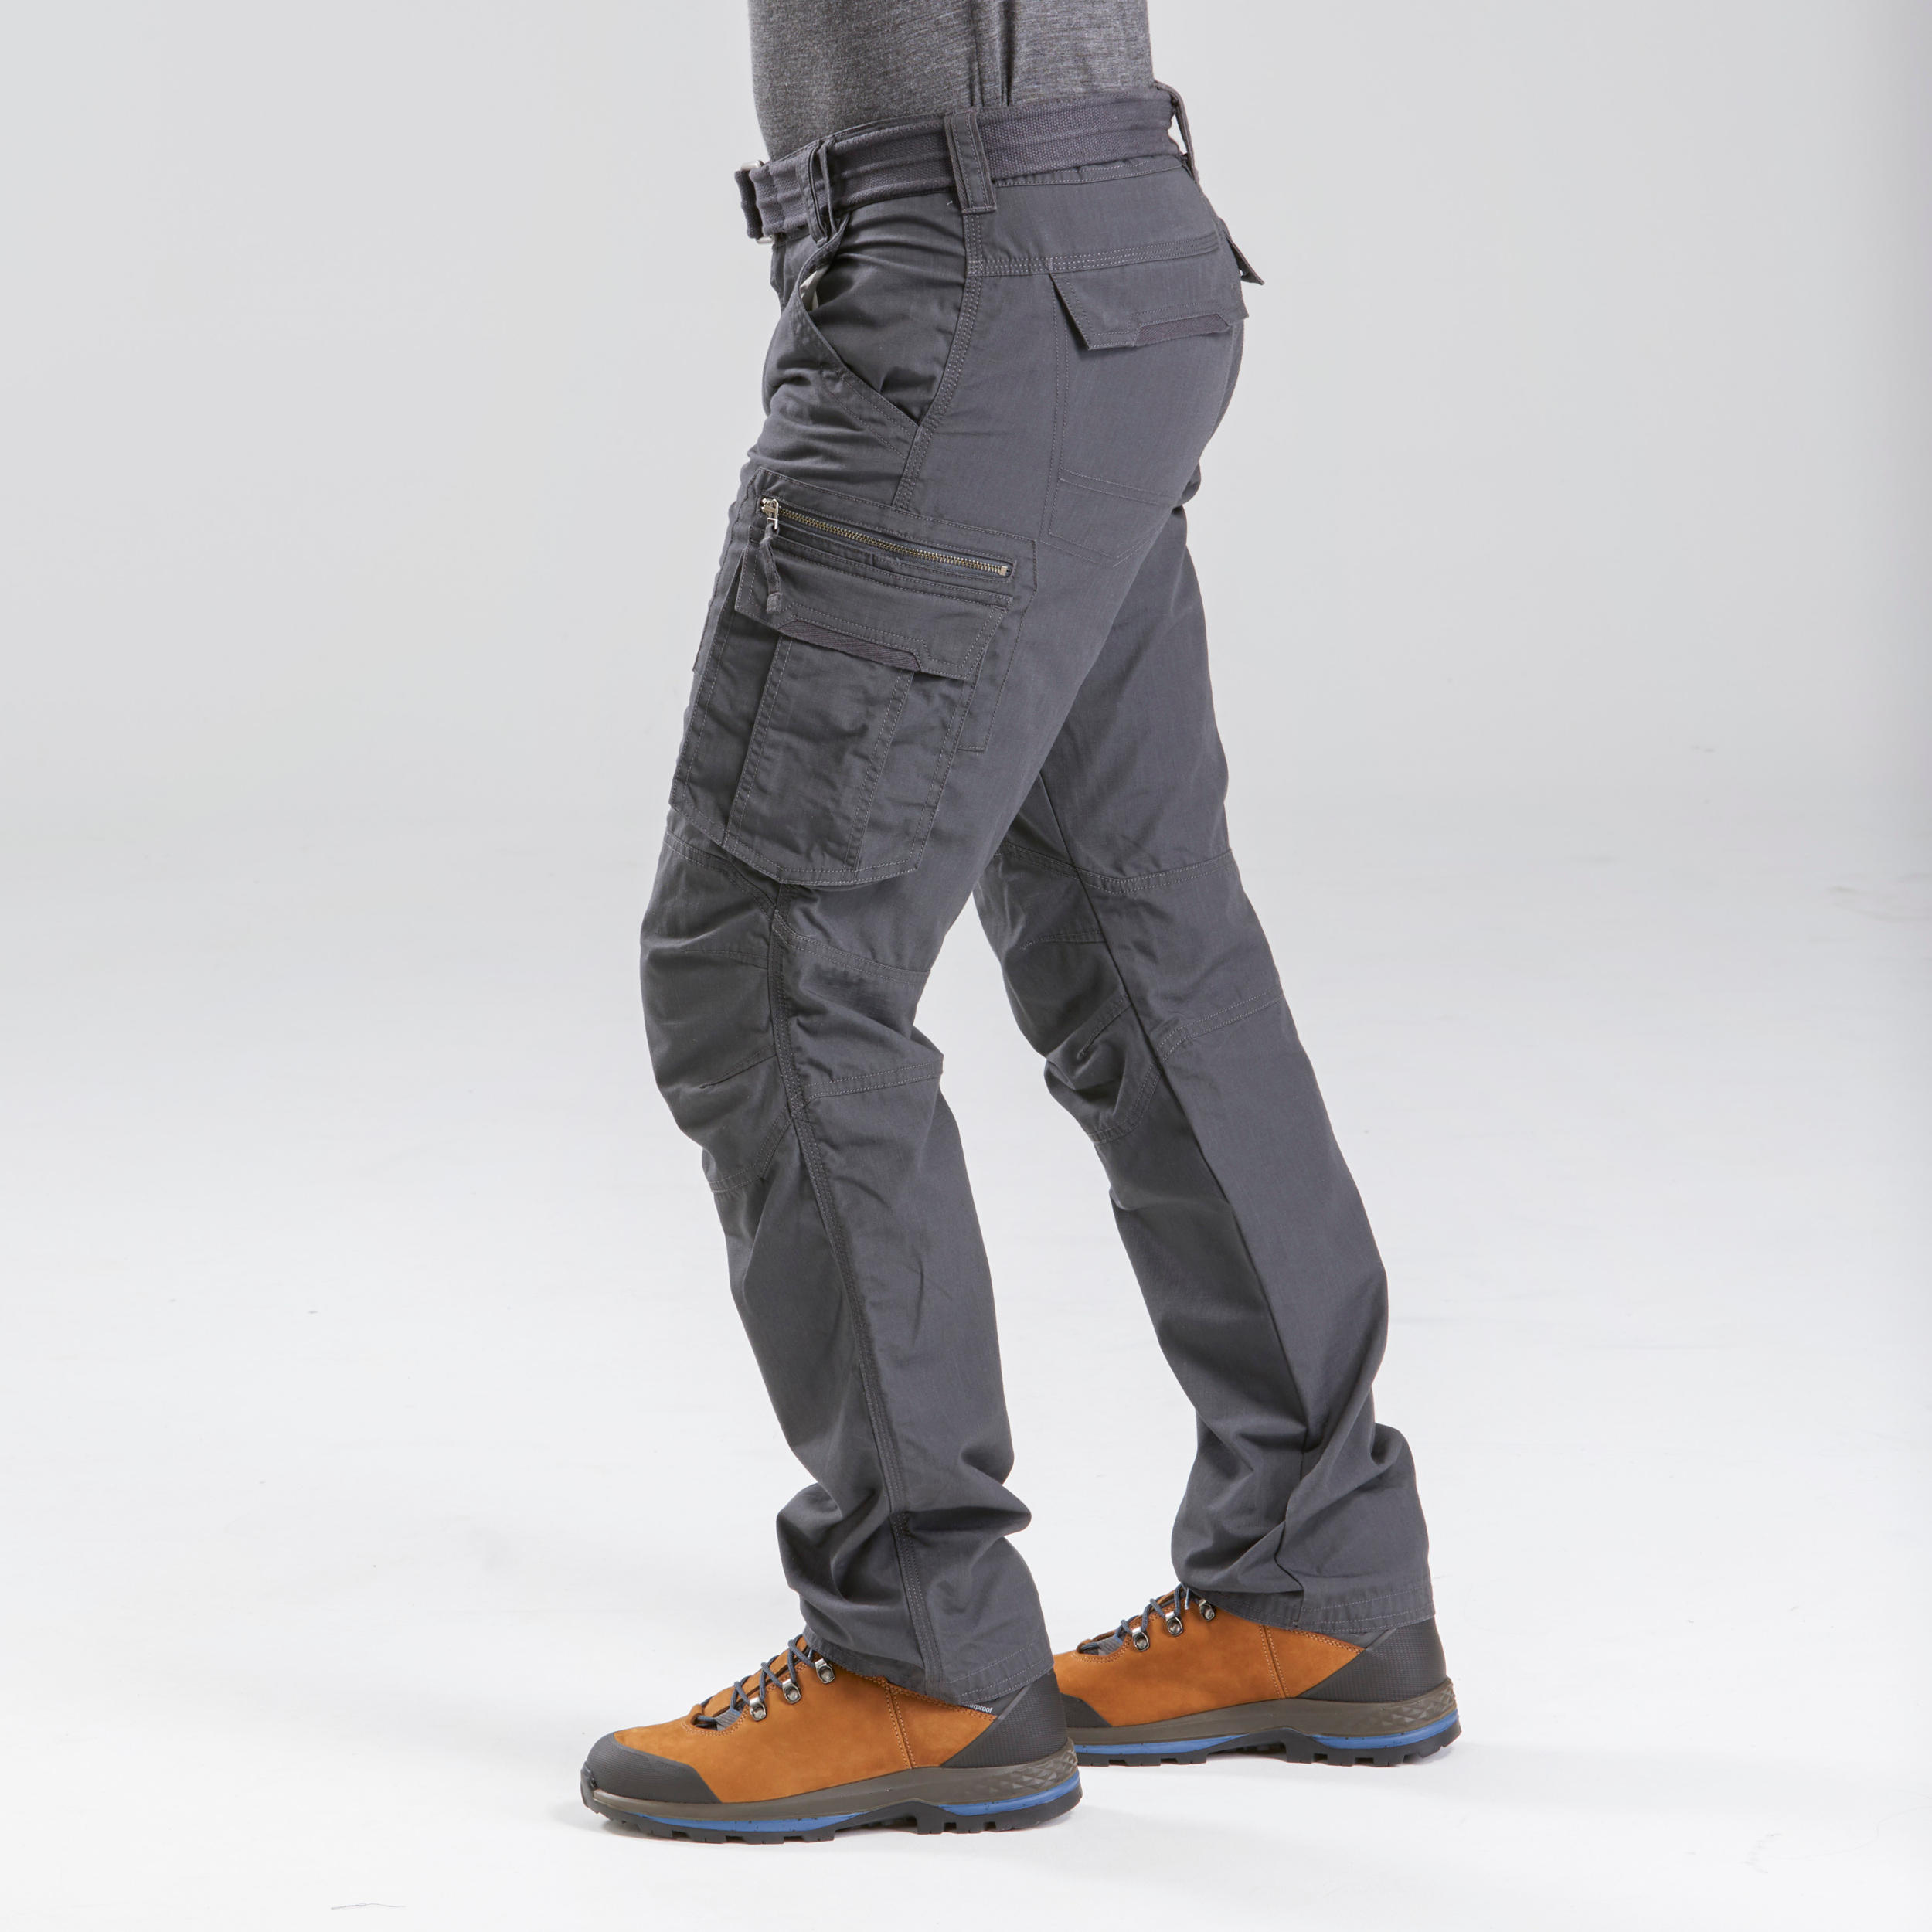 NYAMBA by Decathlon Solid Women Grey Track Pants - Buy NYAMBA by Decathlon  Solid Women Grey Track Pants Online at Best Prices in India | Flipkart.com